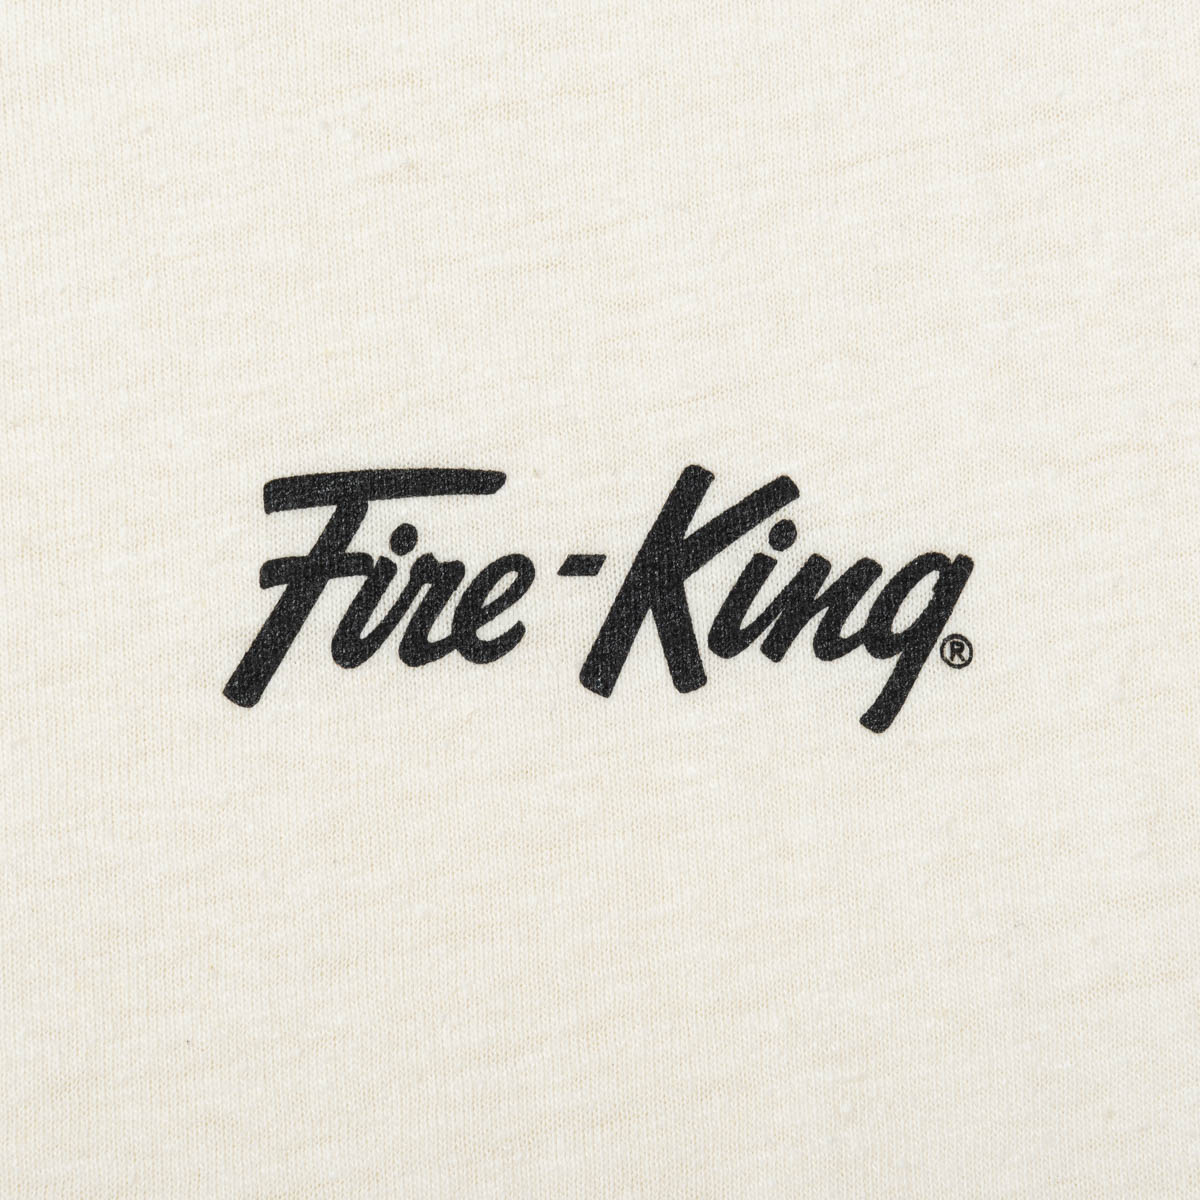 Fire-King ロゴTシャツ by GOHEMP [Natural]